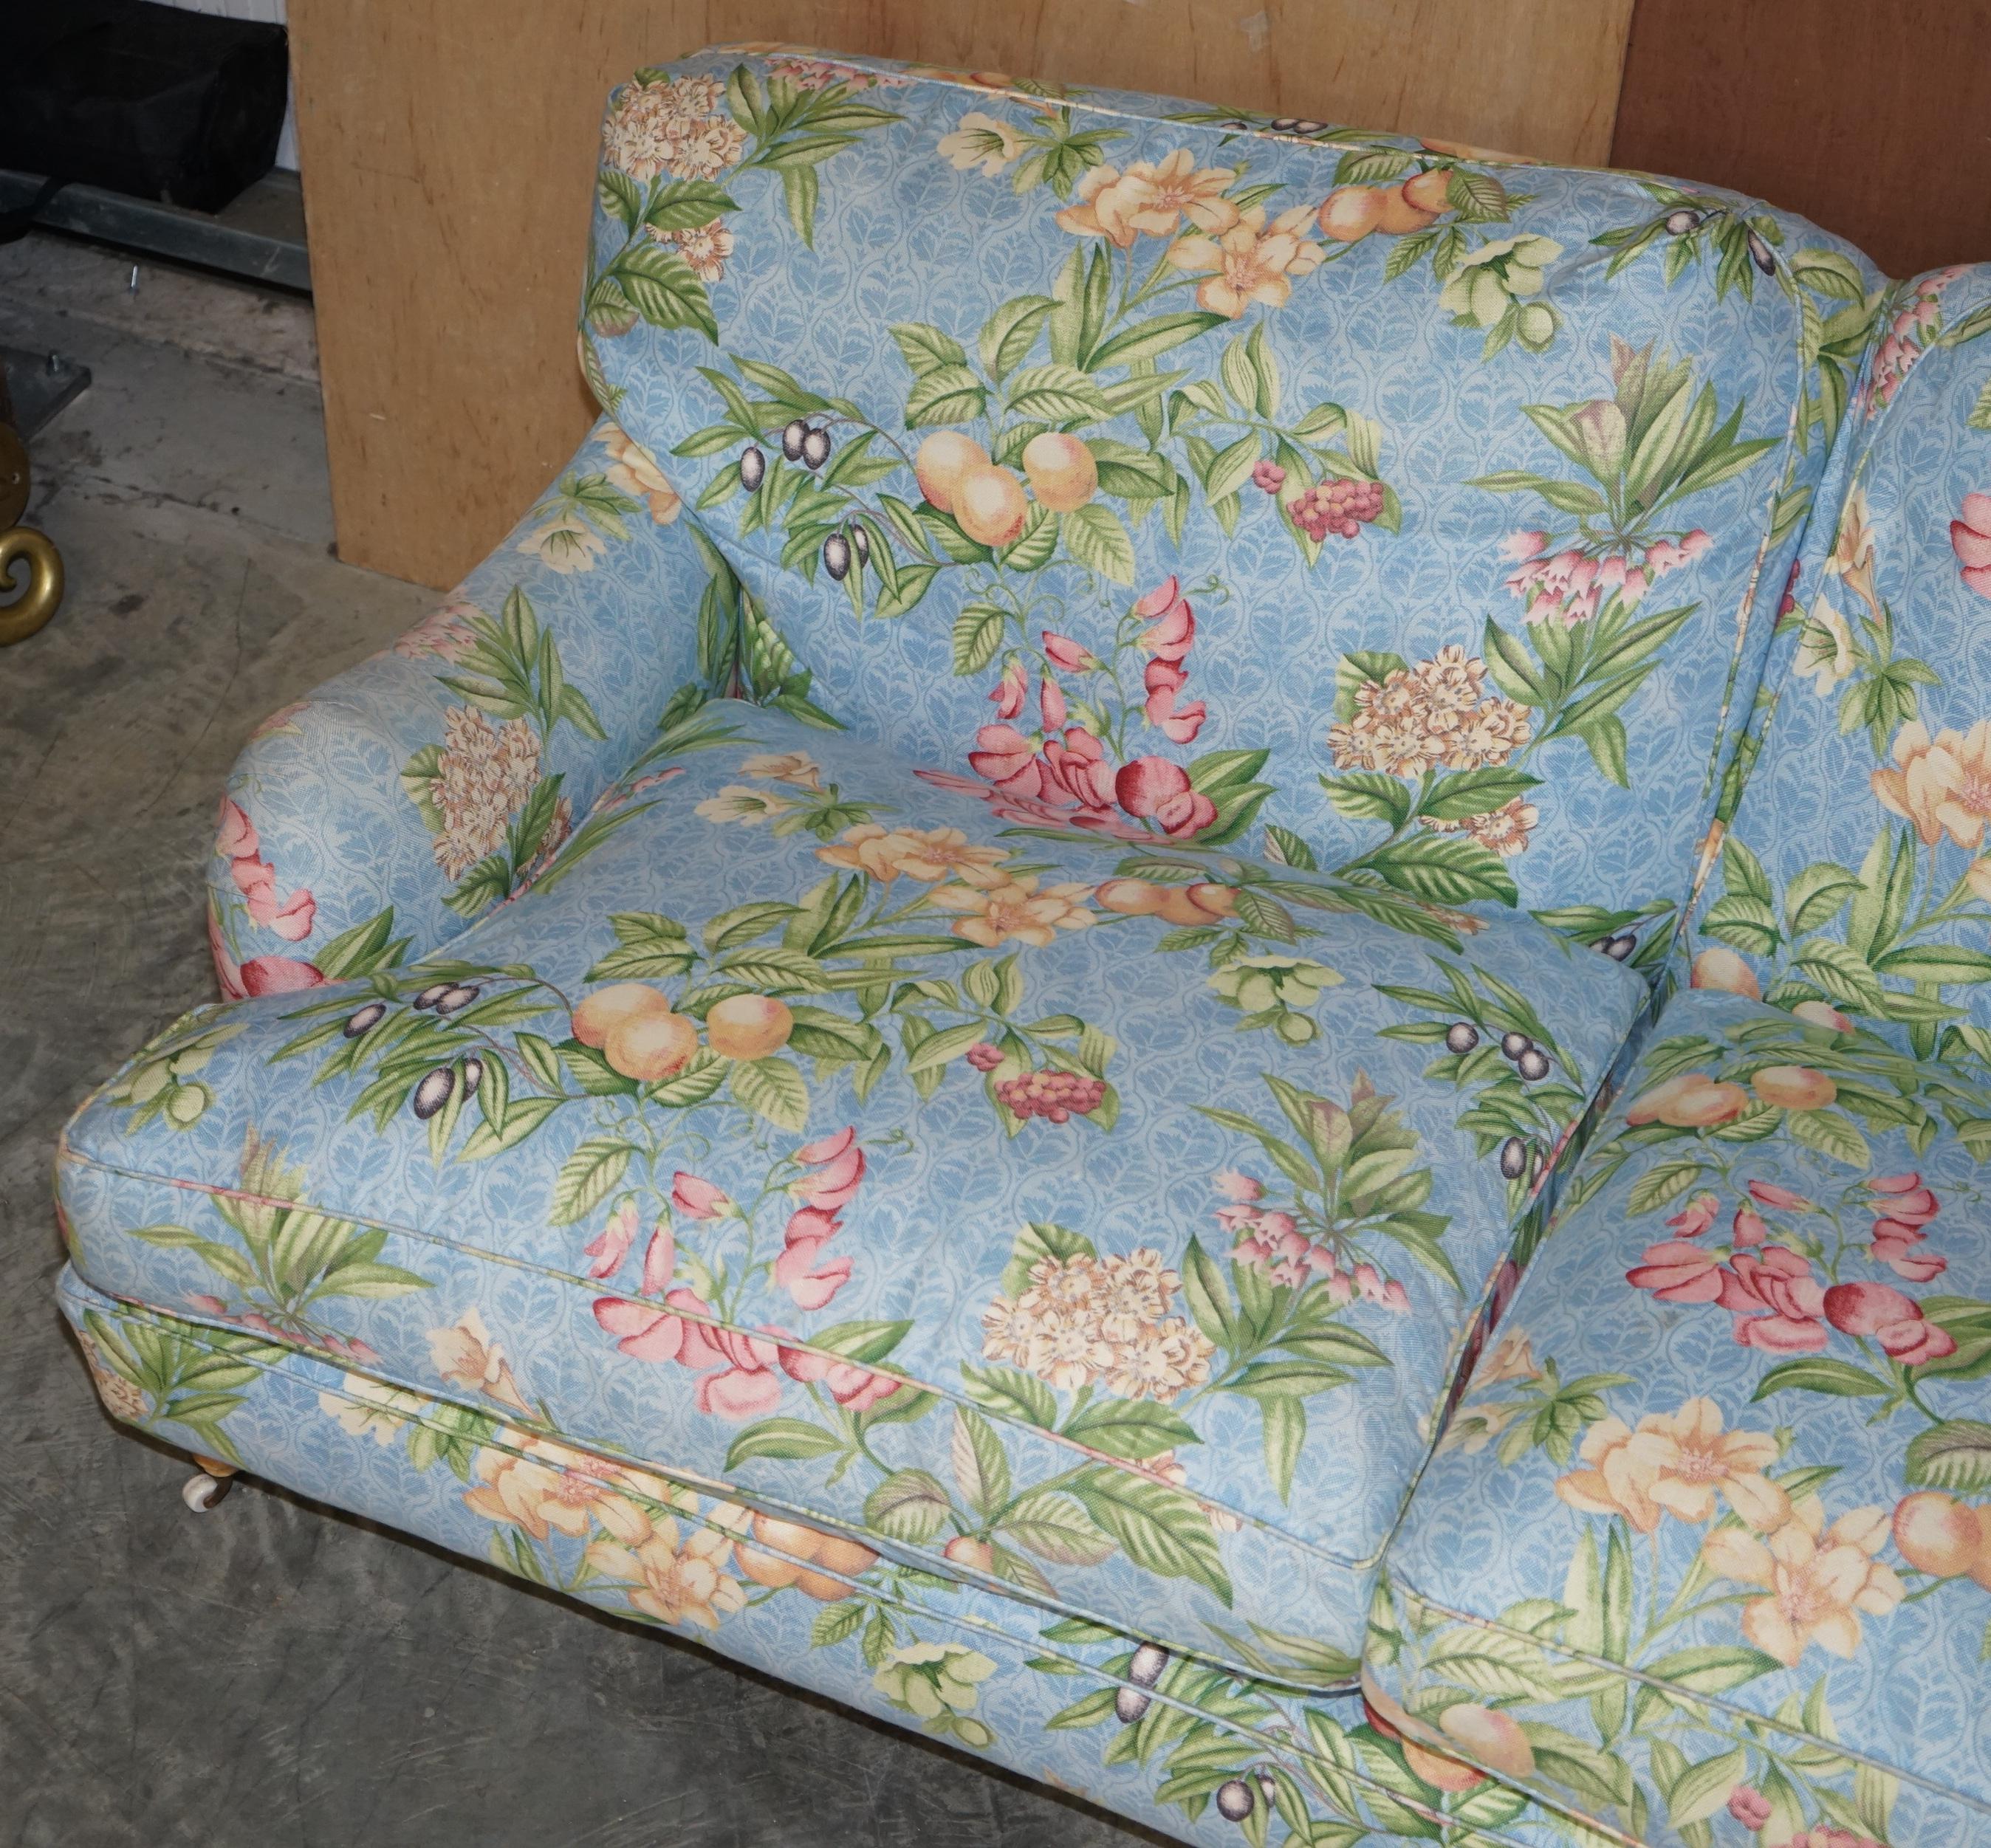 80's floral couch